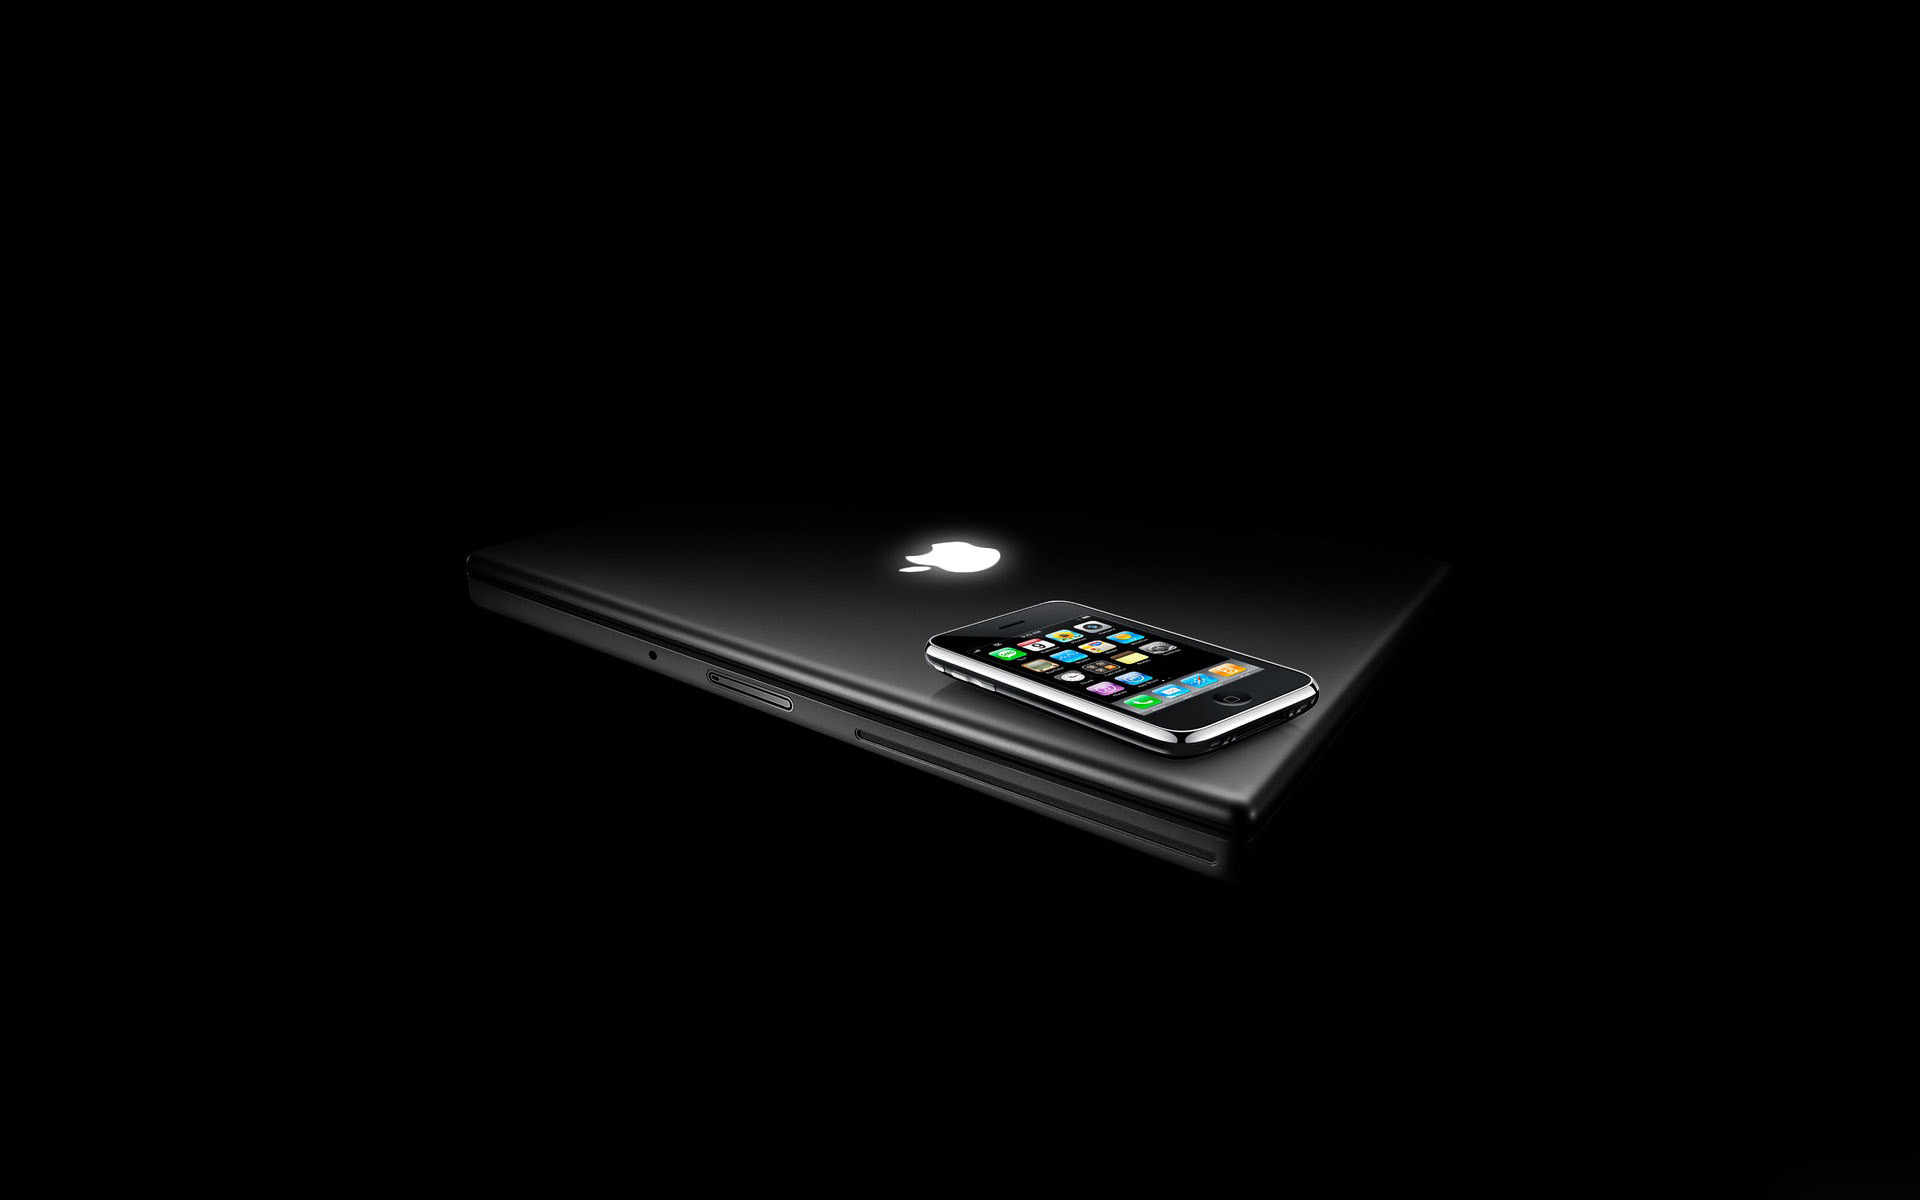 Macbook Pro All Connections HD Wallpaper High Definition